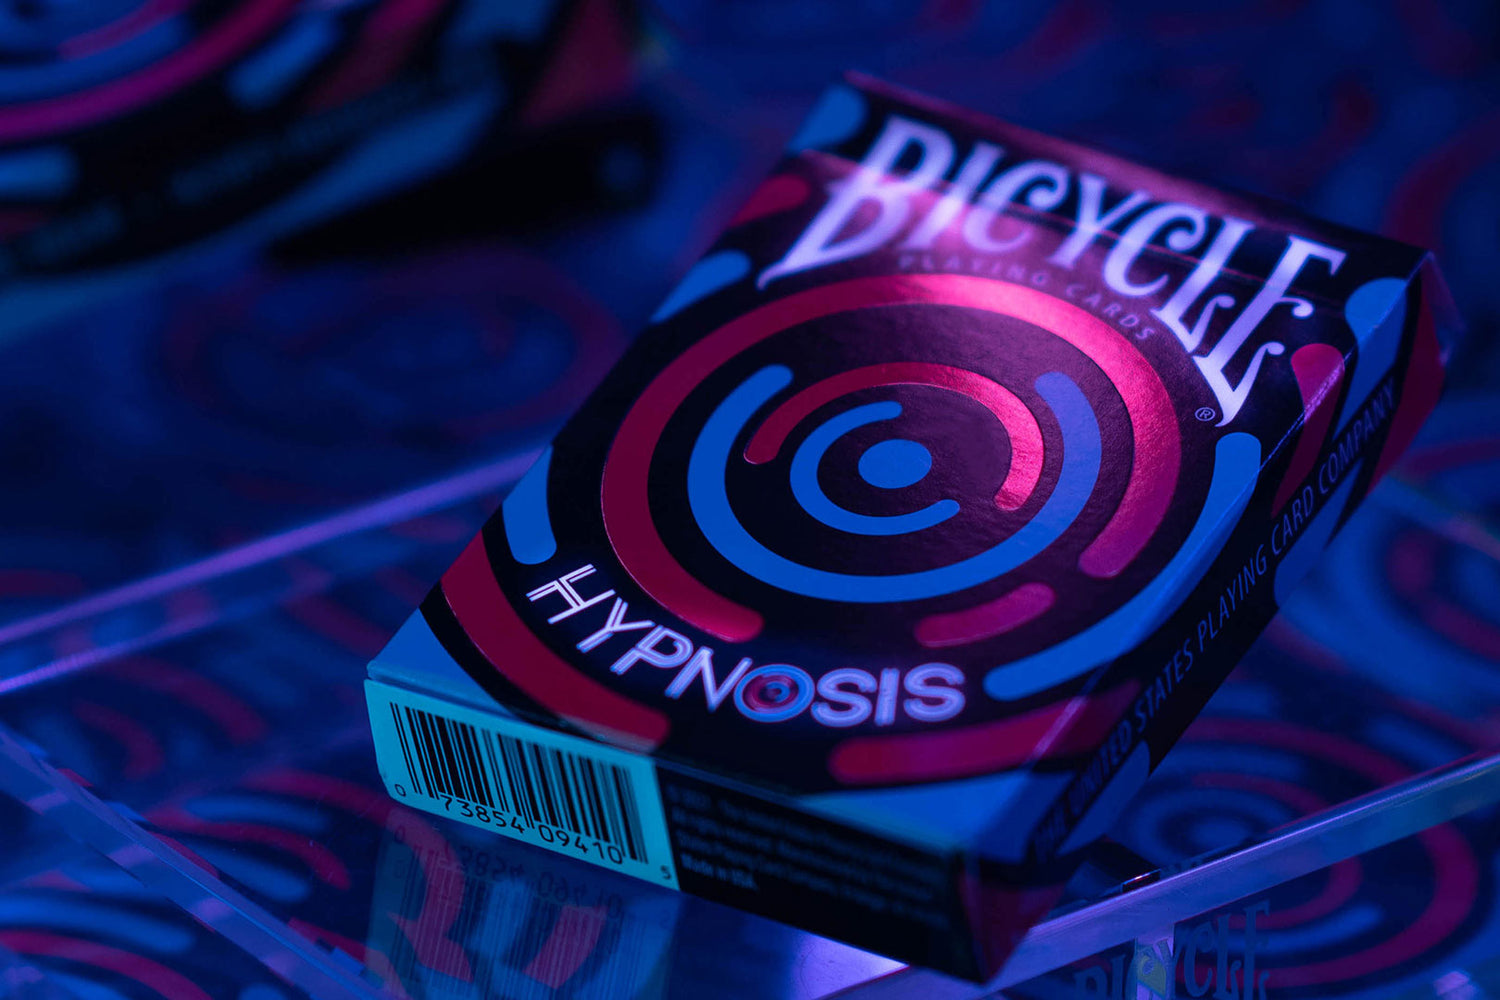 Bicycle Hypnosis V2 V3 Playing Cards